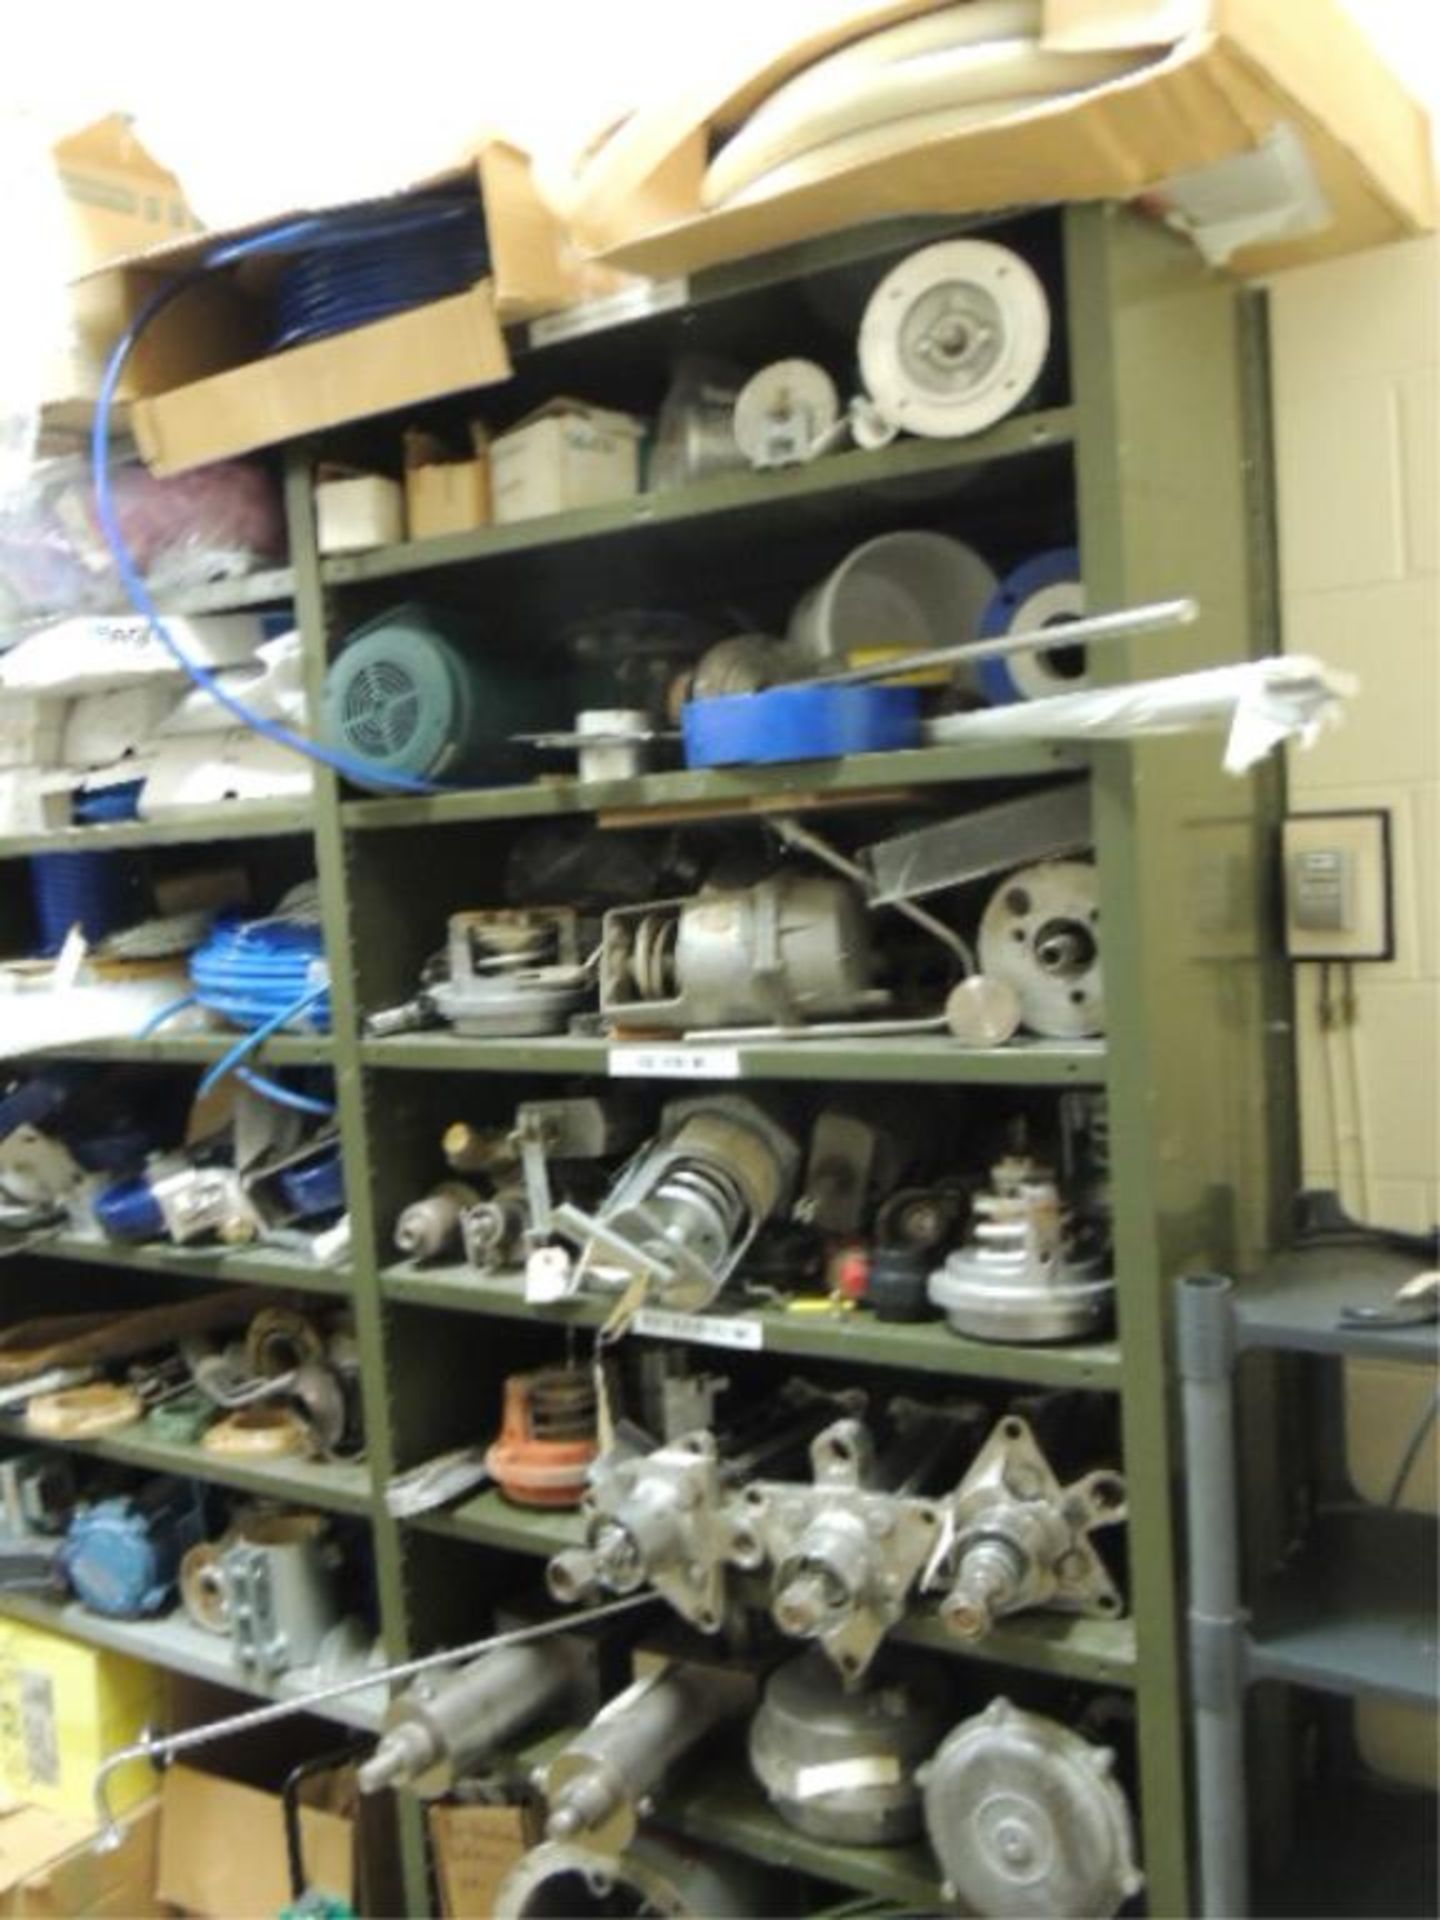 Powerflo Pumps/parts; Lot: 2 door storage cabinet and shelving contents included, rebuilt pumps - Image 3 of 29